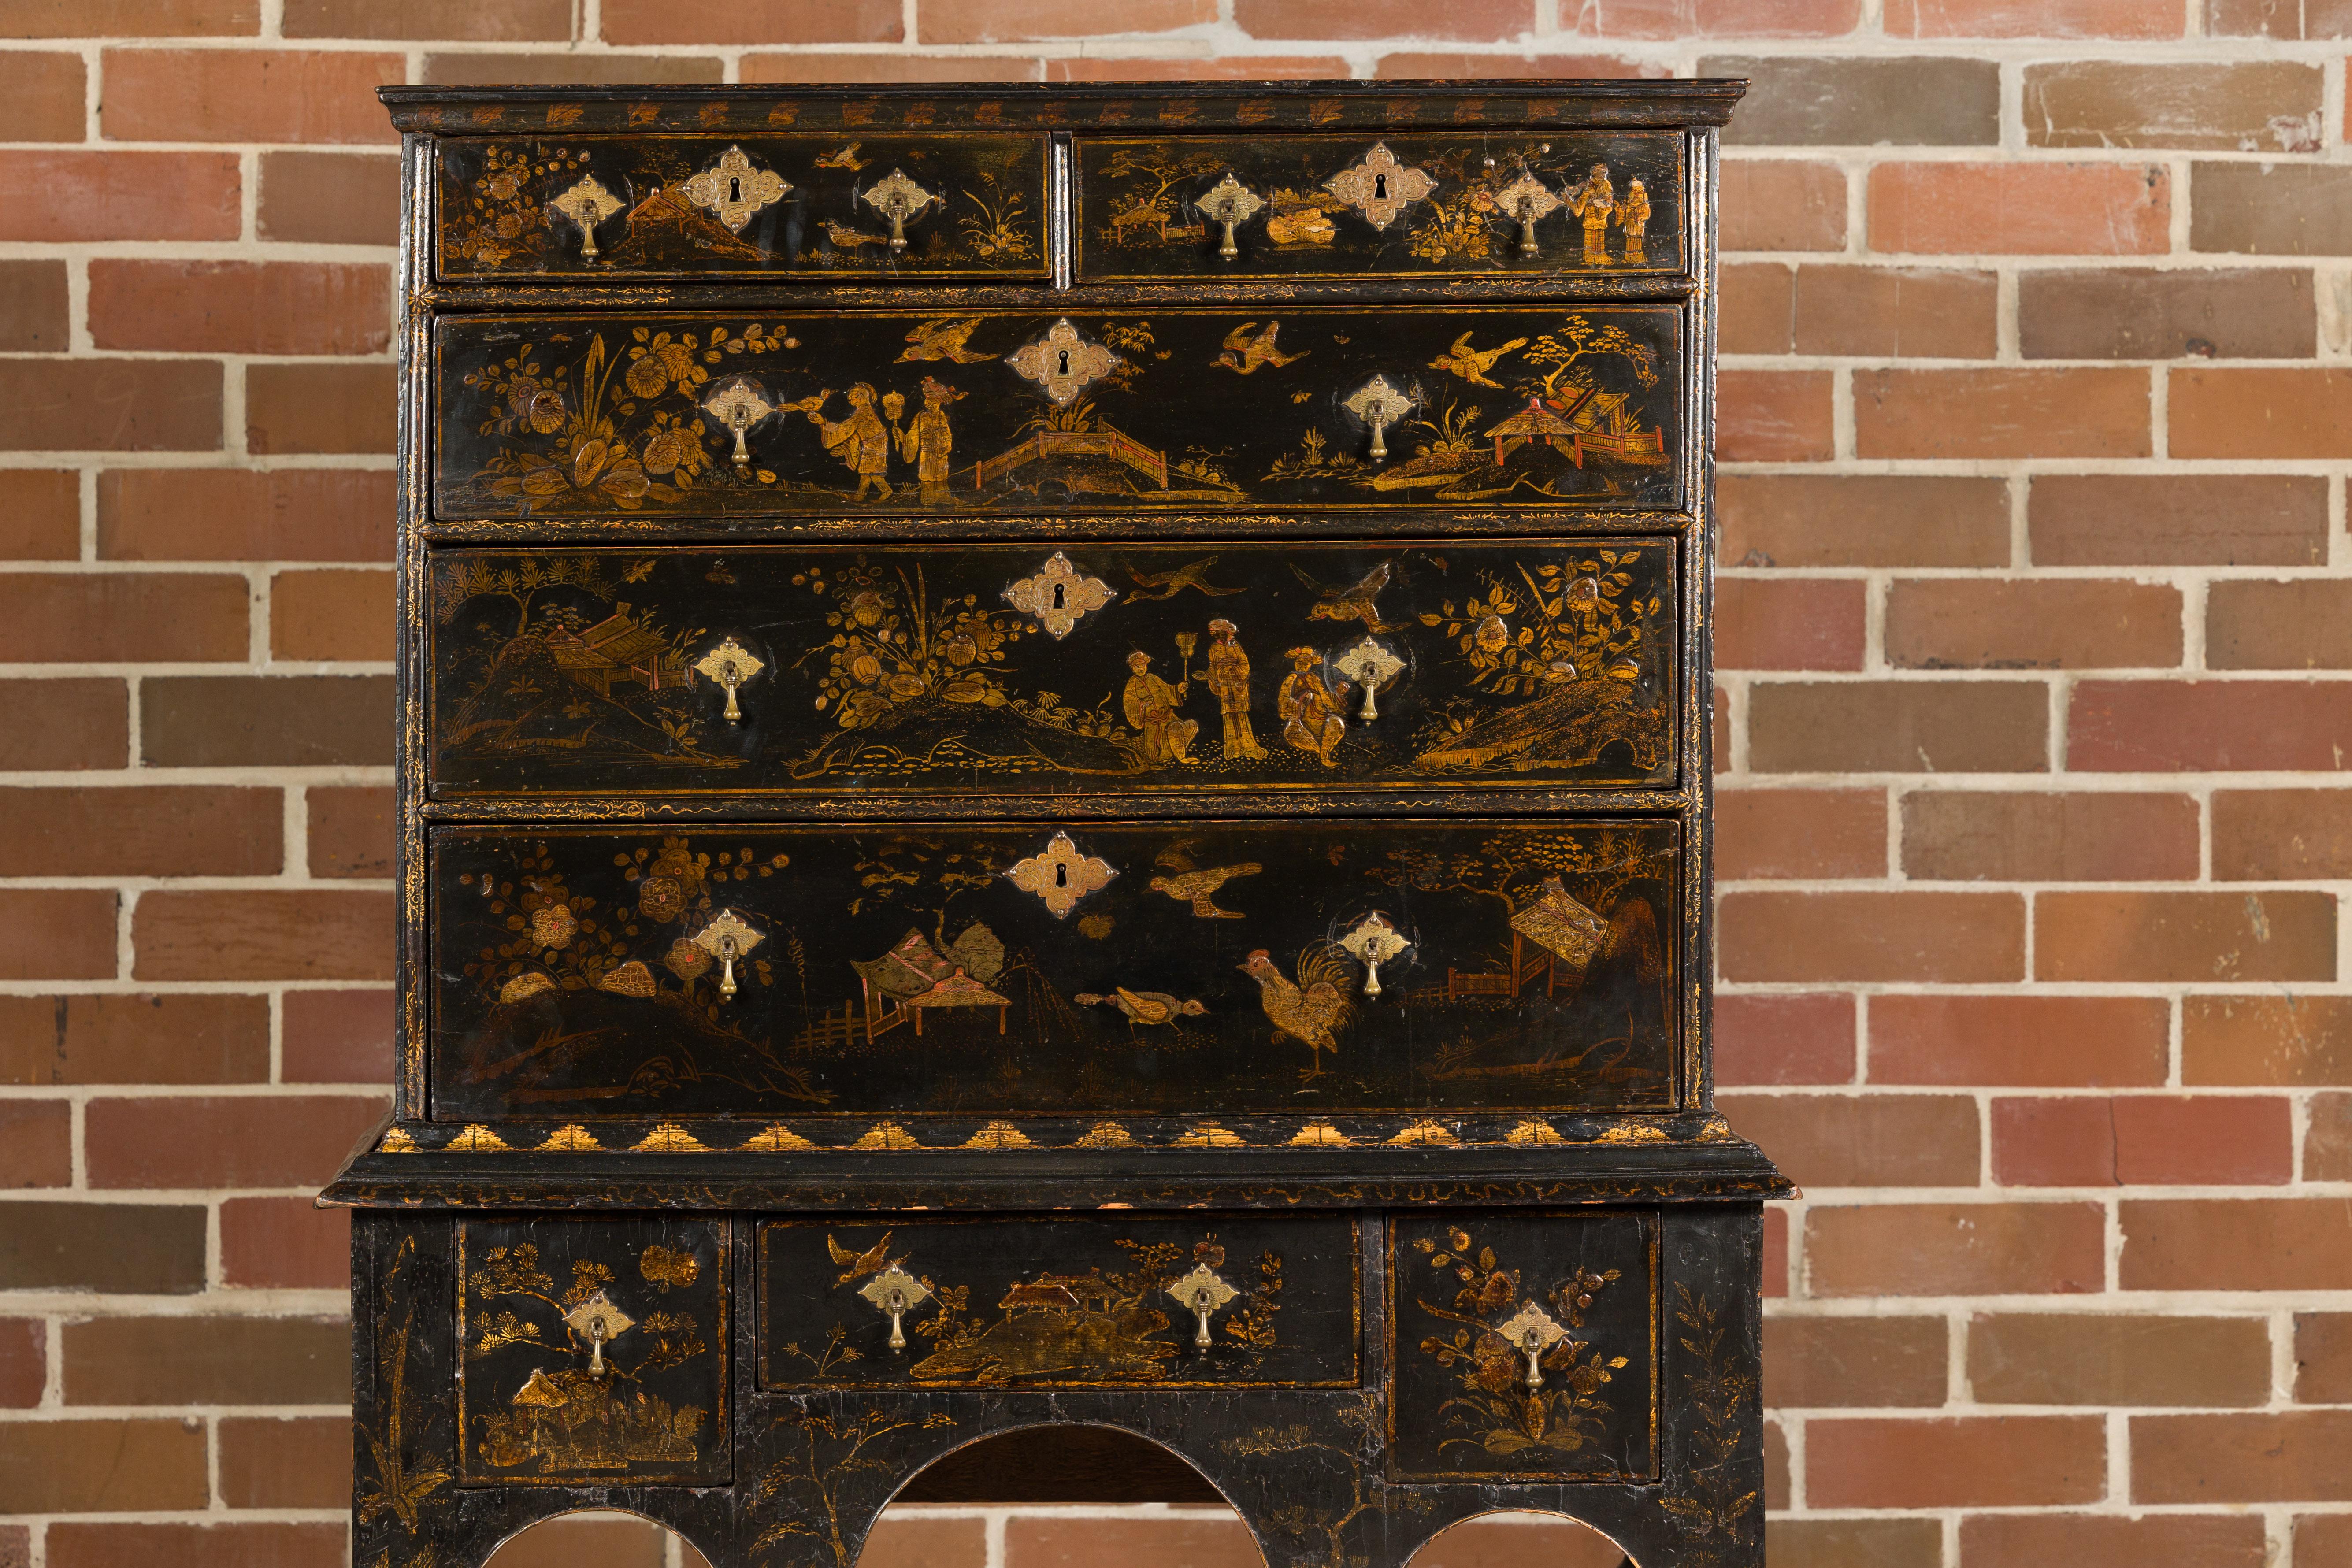 An English black and gold Chinoiserie highboy chest from the 19th century with eight drawers, tapered hexagonal legs, low stretchers and bun feet. Delve into the opulence of the Orient with this striking 19th-century English Chinoiserie highboy